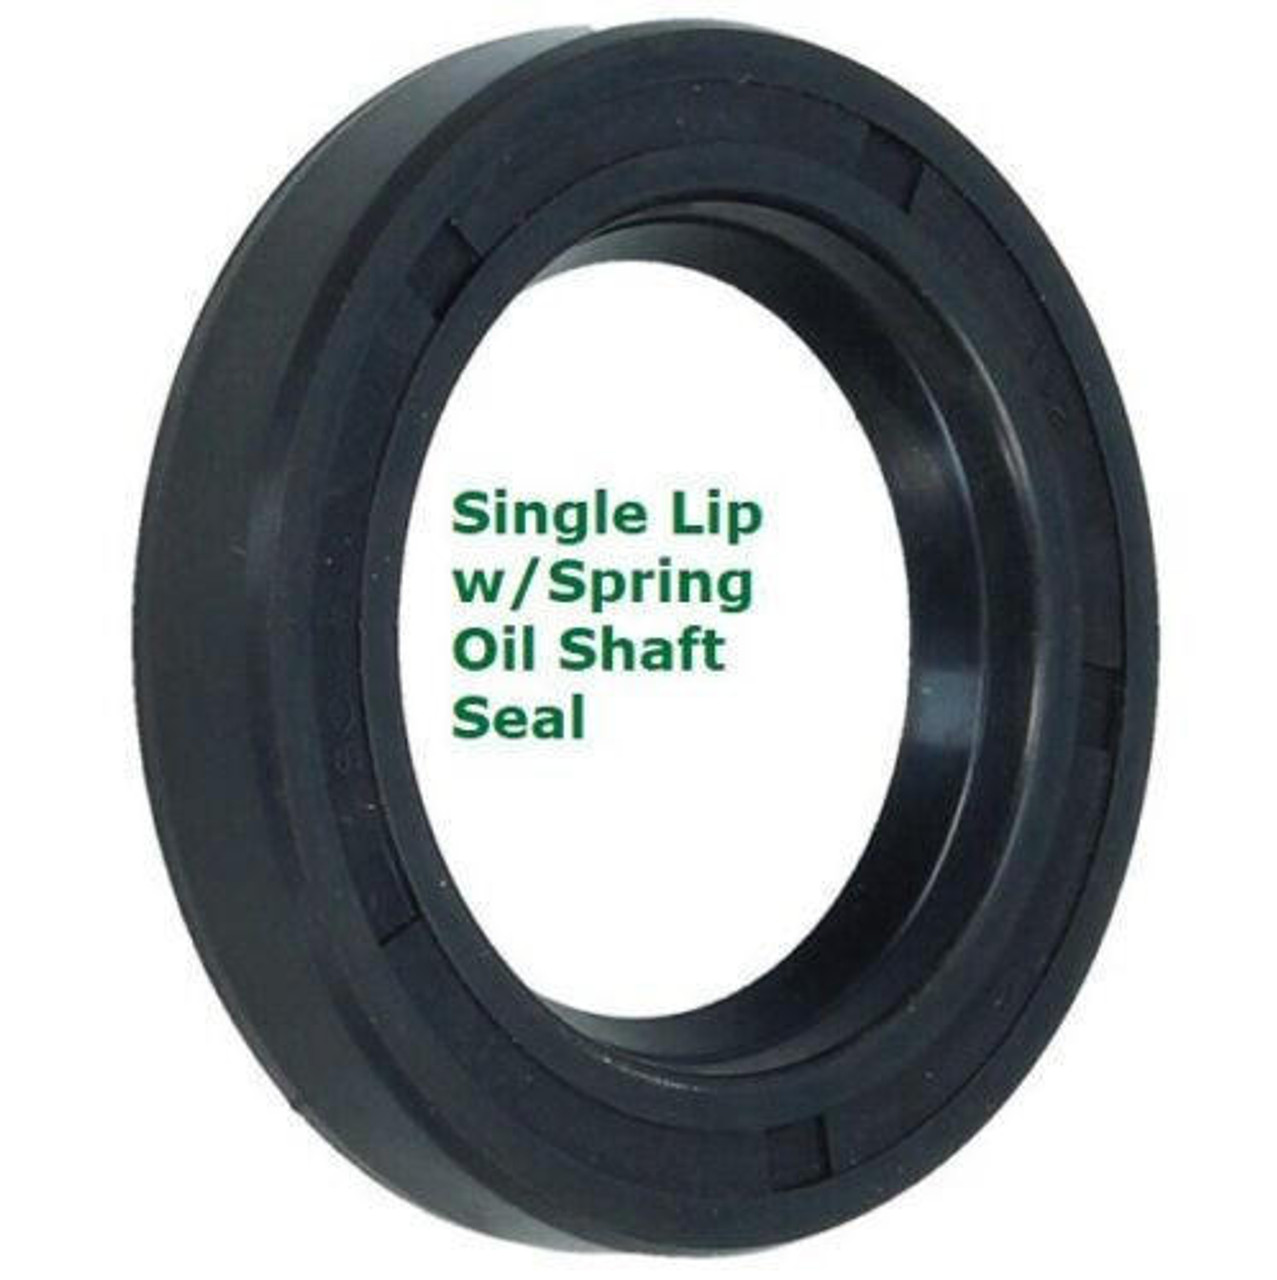 Metric Oil Shaft Seal 130 x 170 x 13mm   Price for 1 pc